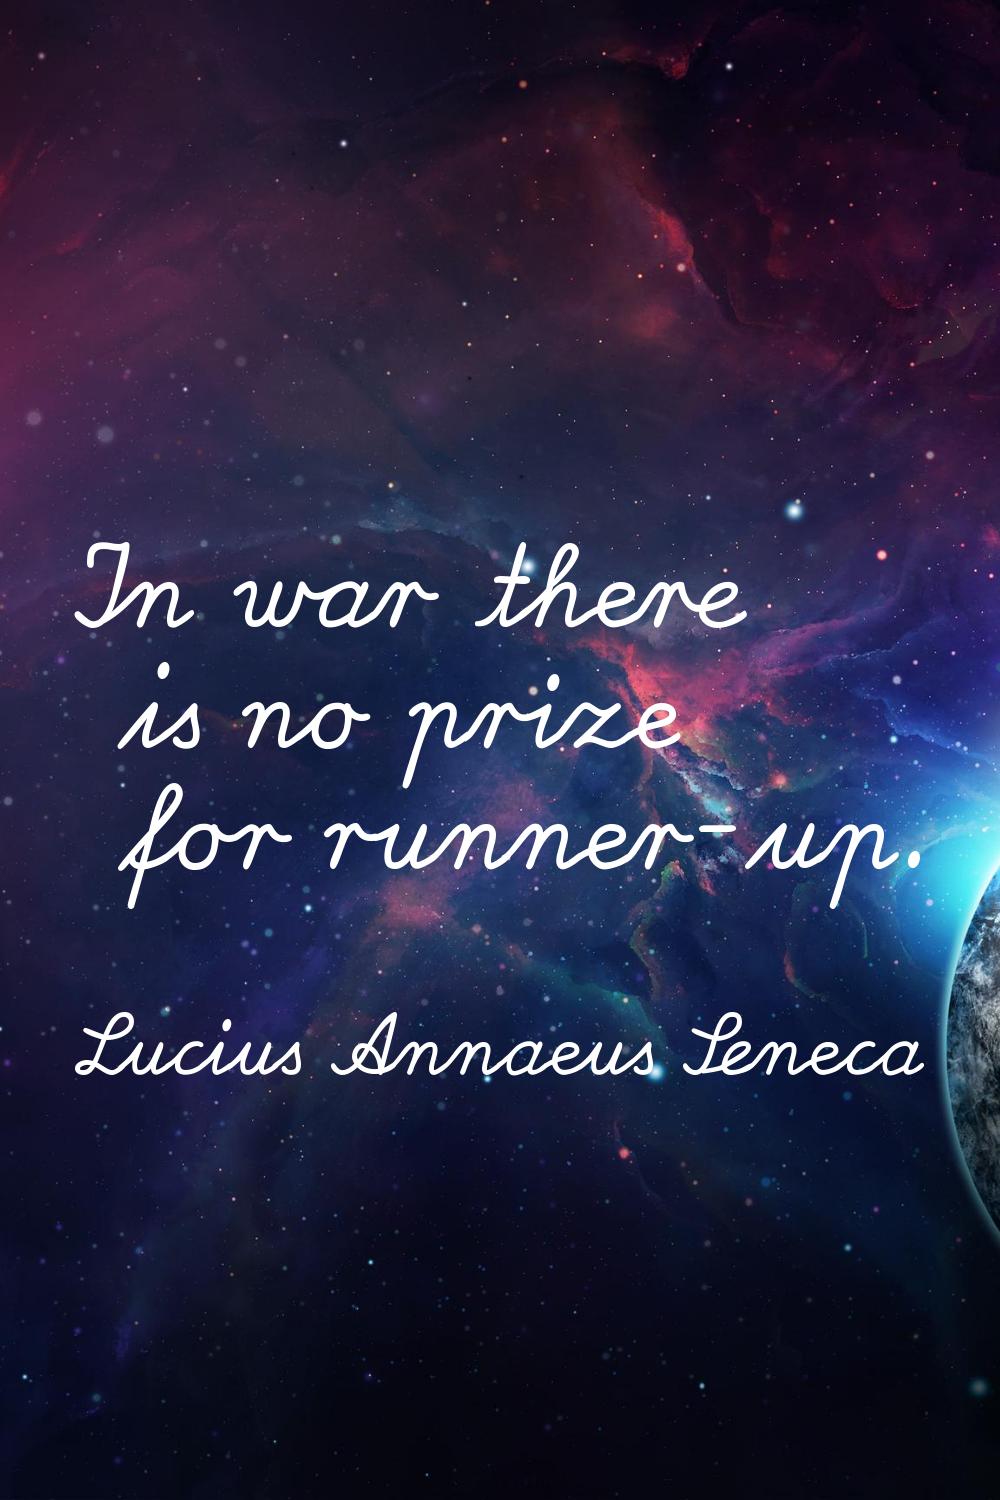 In war there is no prize for runner-up.